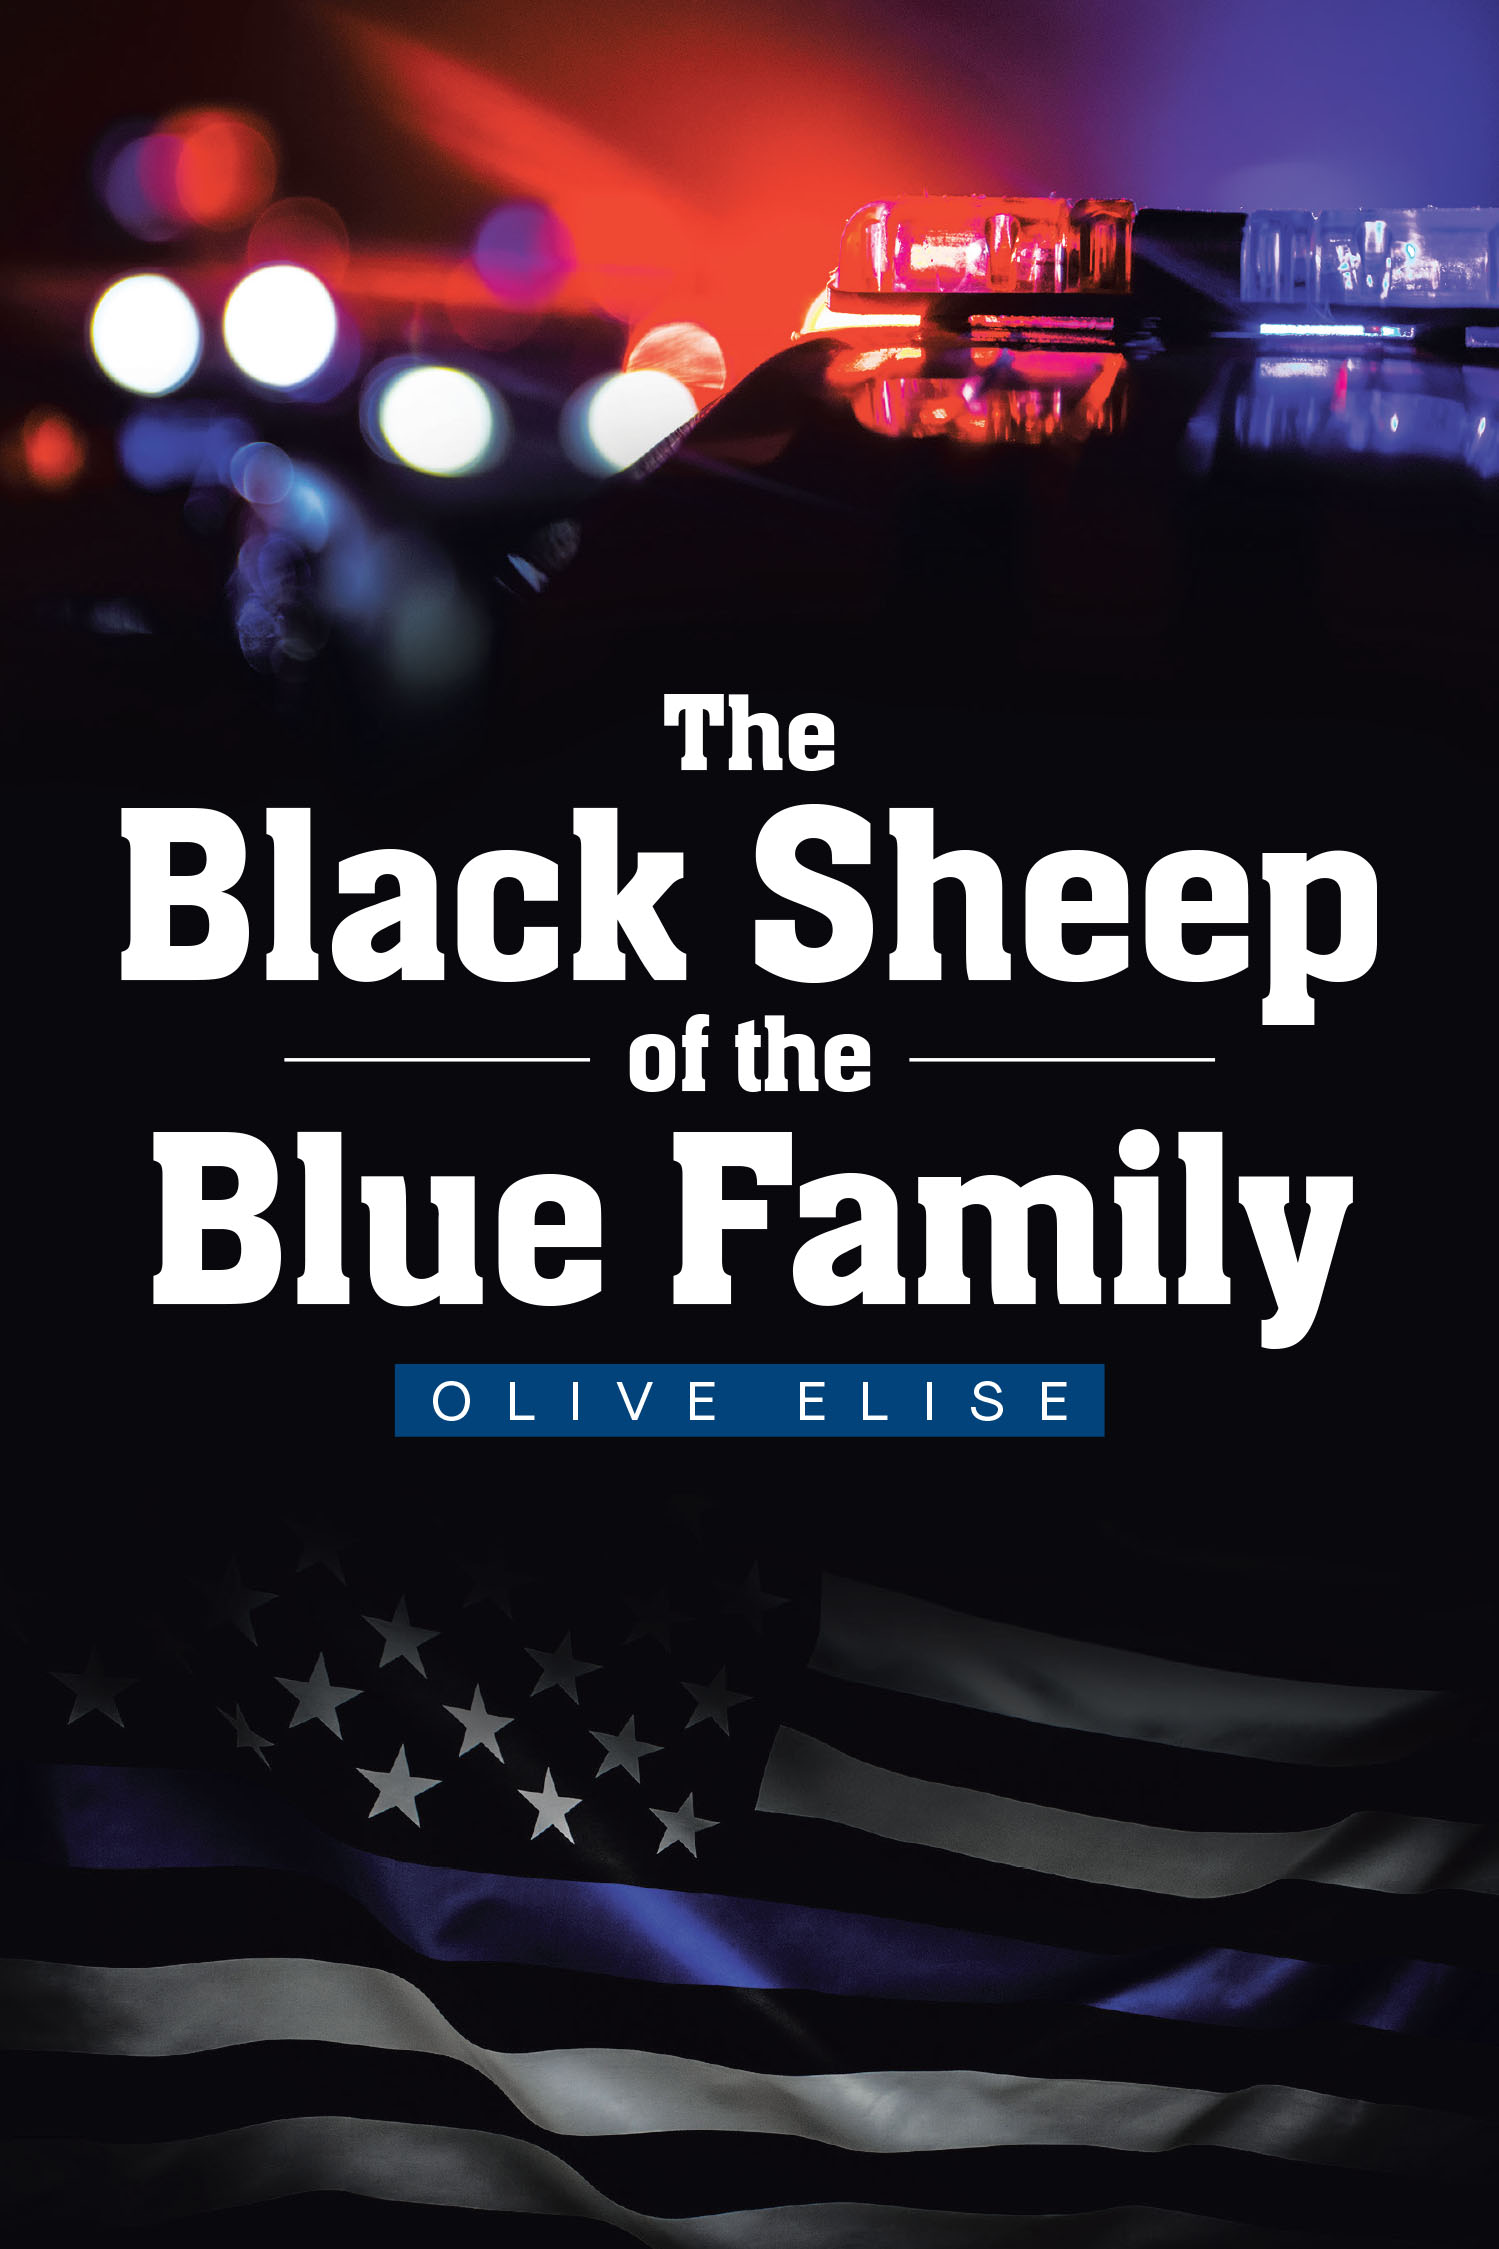 Author Olive Elise’s New Book, "The Black Sheep of the Blue Family," is a Powerful Memoir Advocating for Healing and Justice in the Wake of Workplace Sexual Assault